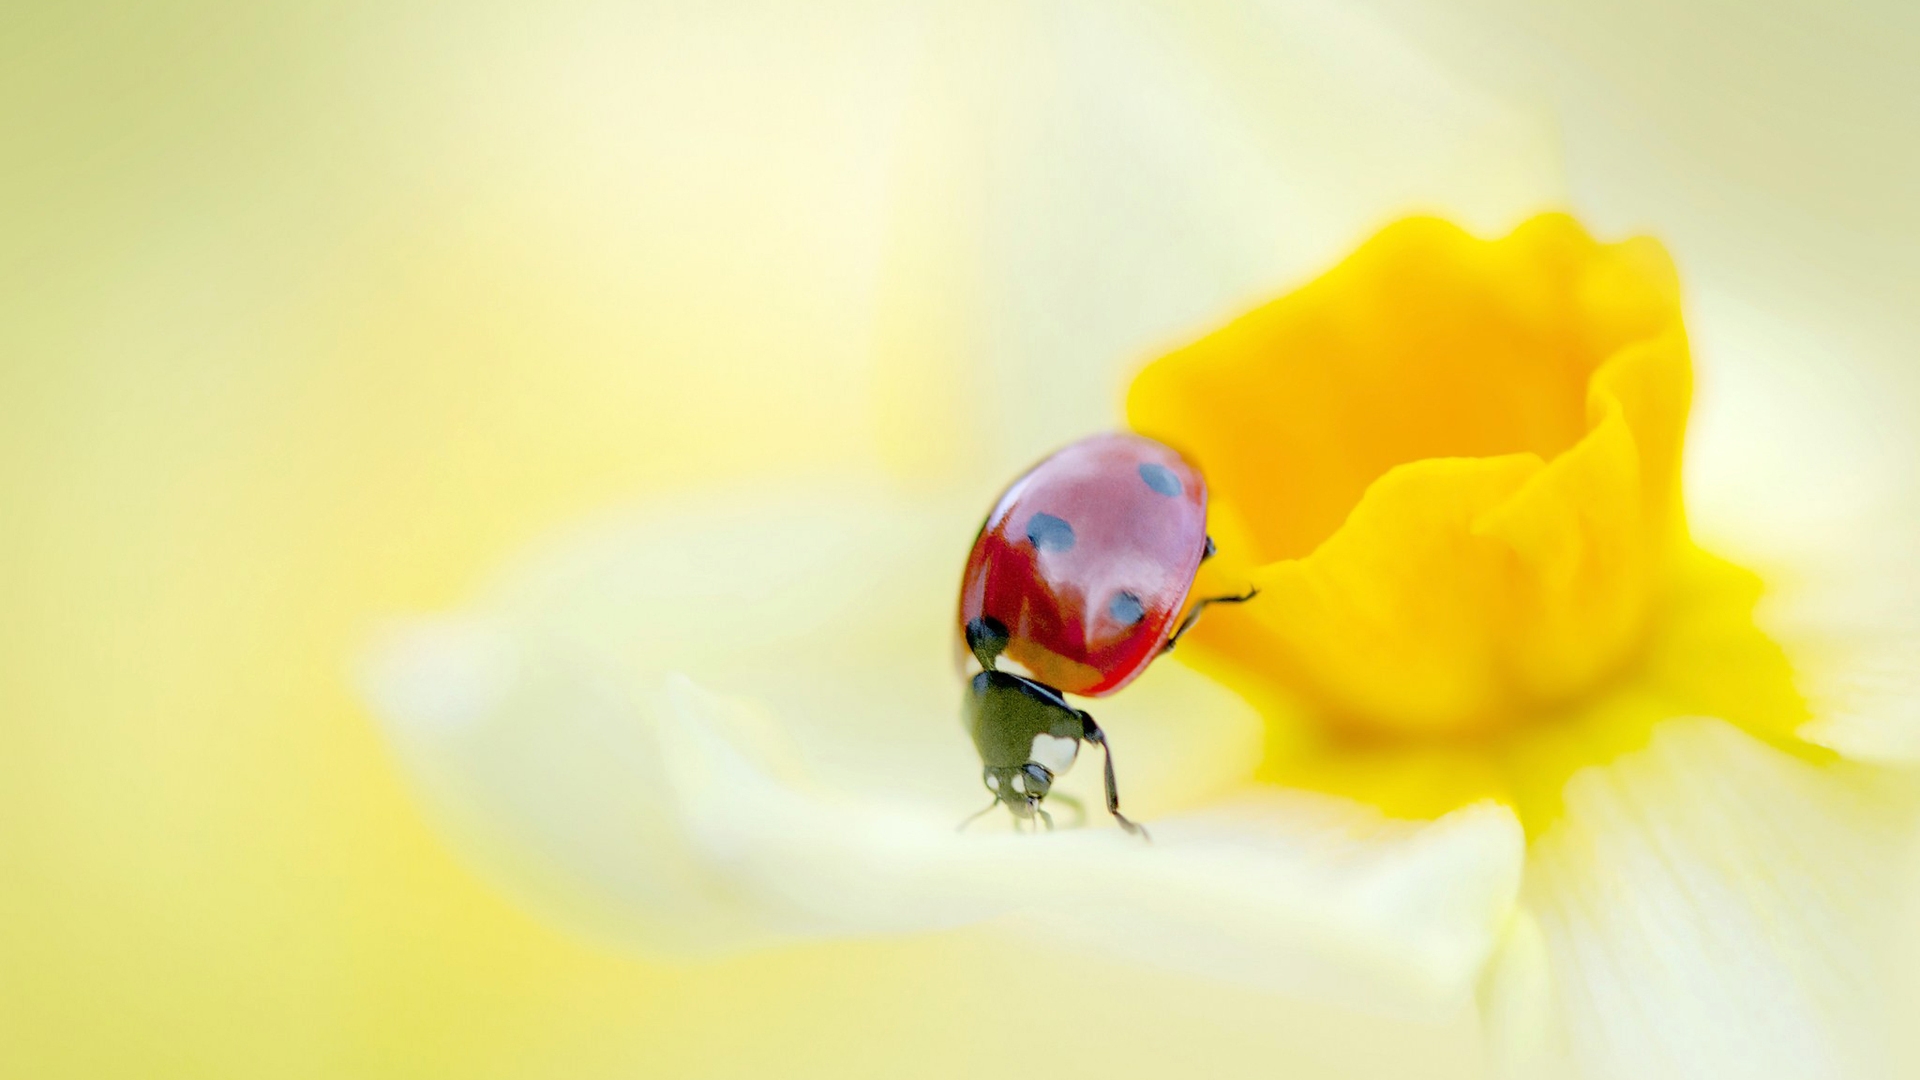 Ladybird on a Yellow Daffodil Flower  for 1920 x 1080 HDTV 1080p resolution